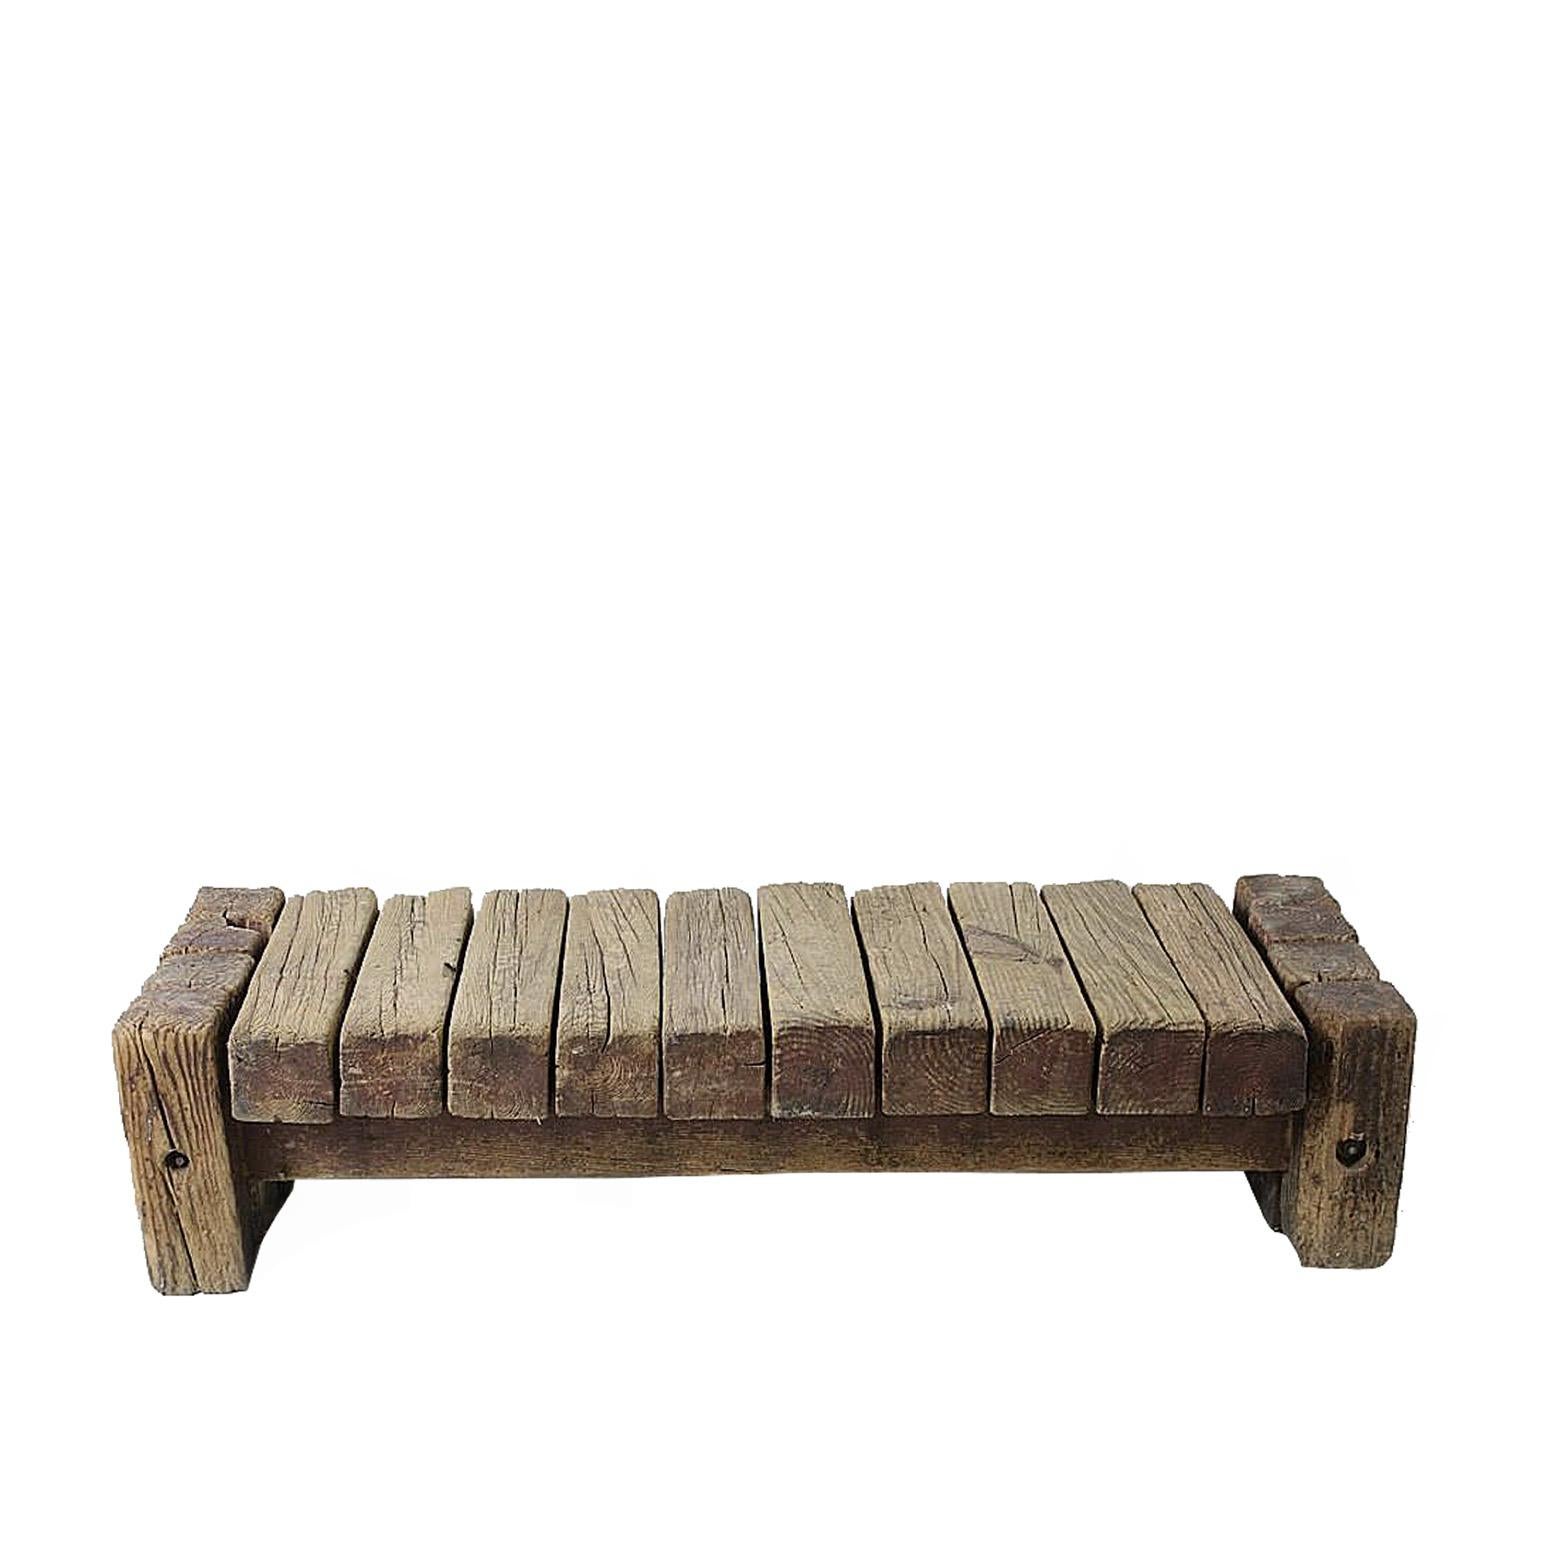 Brutalist American Unusual Large Solid Pine Bench Made of Squared Logs 1960s / 1970s For Sale